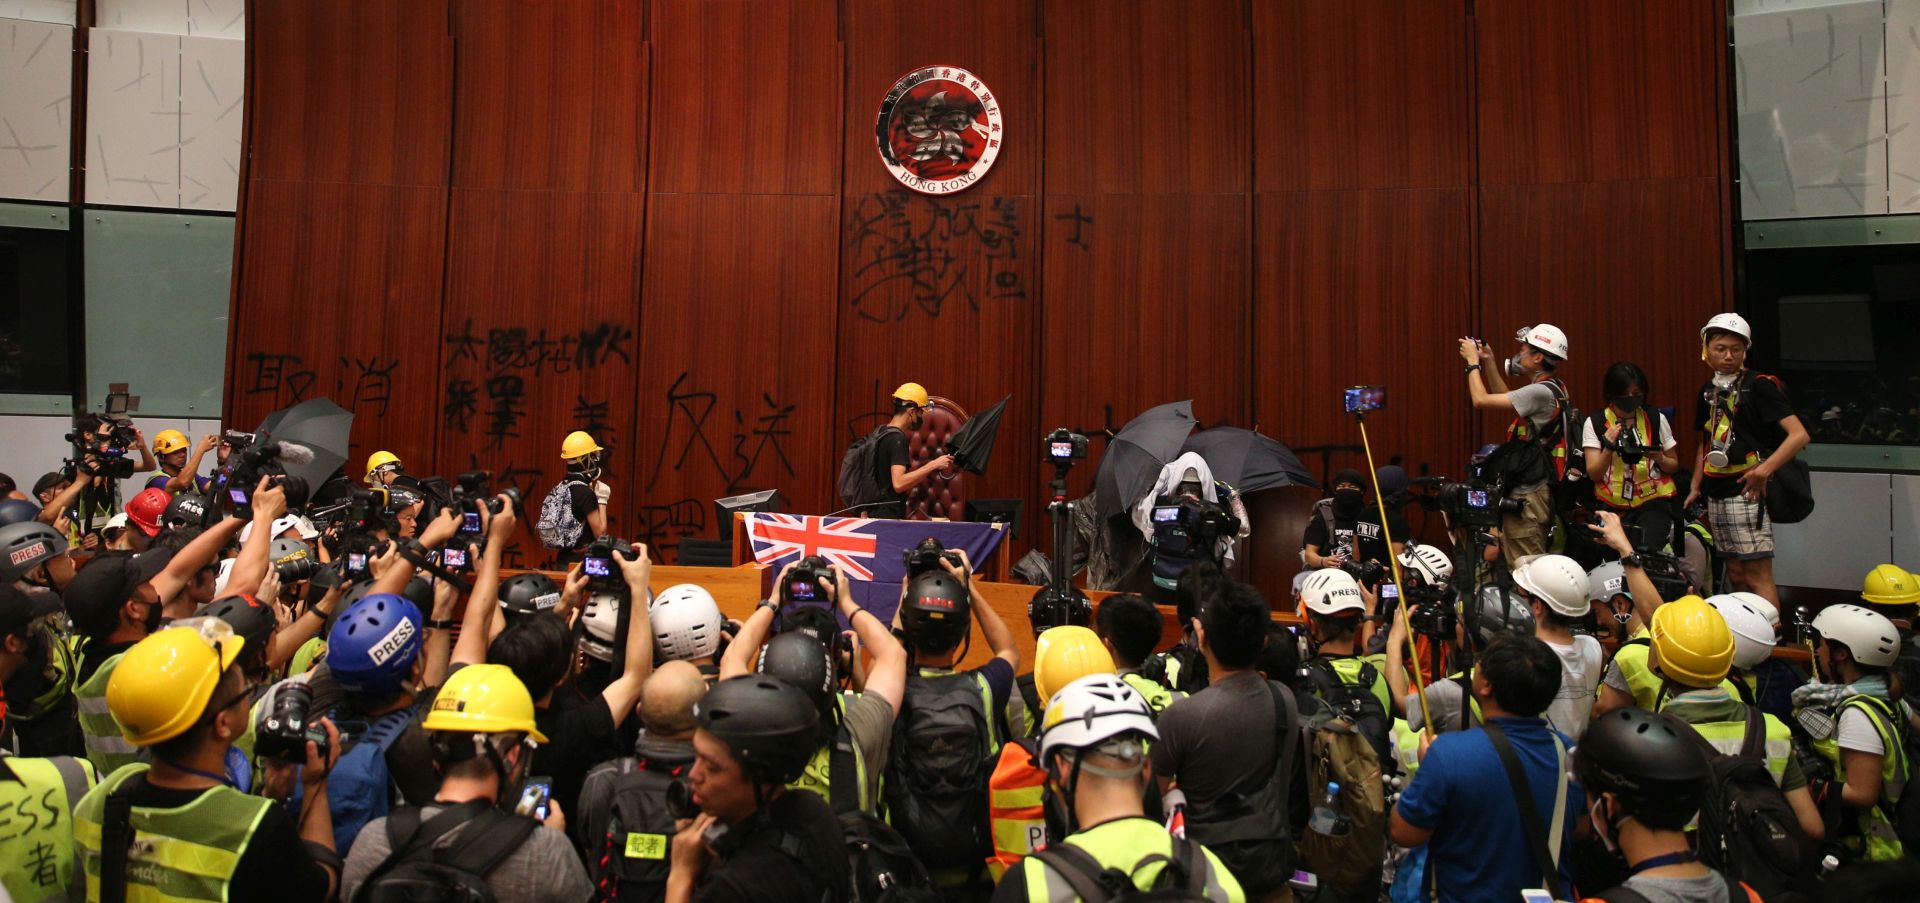 epa07687398 Protesters break into the main chamber of the Legislative Council building during the annual 01 July pro-democracy march in Hong Kong, China, 01 July 2019. Protesters are demanding the resignation of Hong Kong Chief Executive Carrie Lam and the full withdrawal of a suspended extradition bill. On 01 July, Hong Kong marks the 1997 transfer of sovereignty of Hong Kong from Britain to China.  EPA/JEROME FAVRE